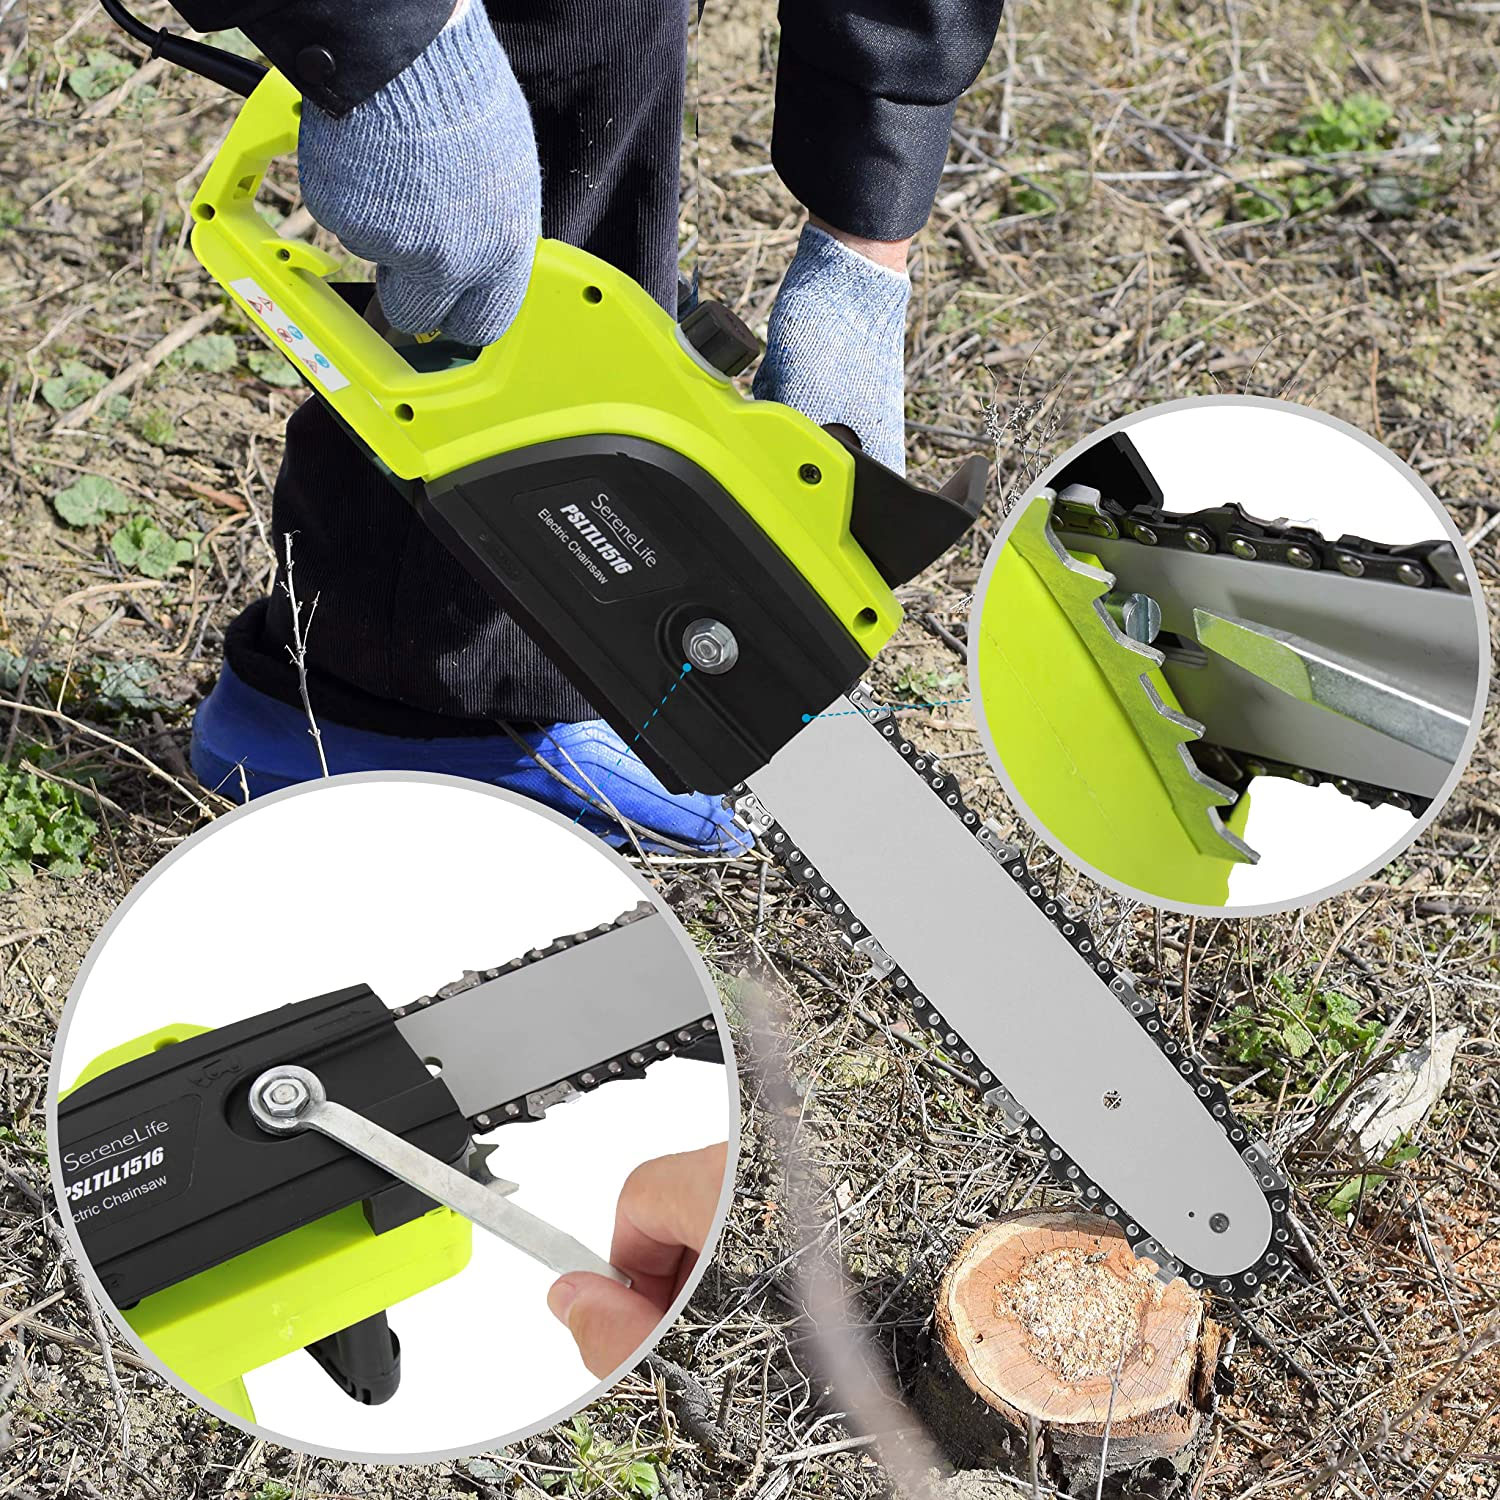 electric tree trimmer saw